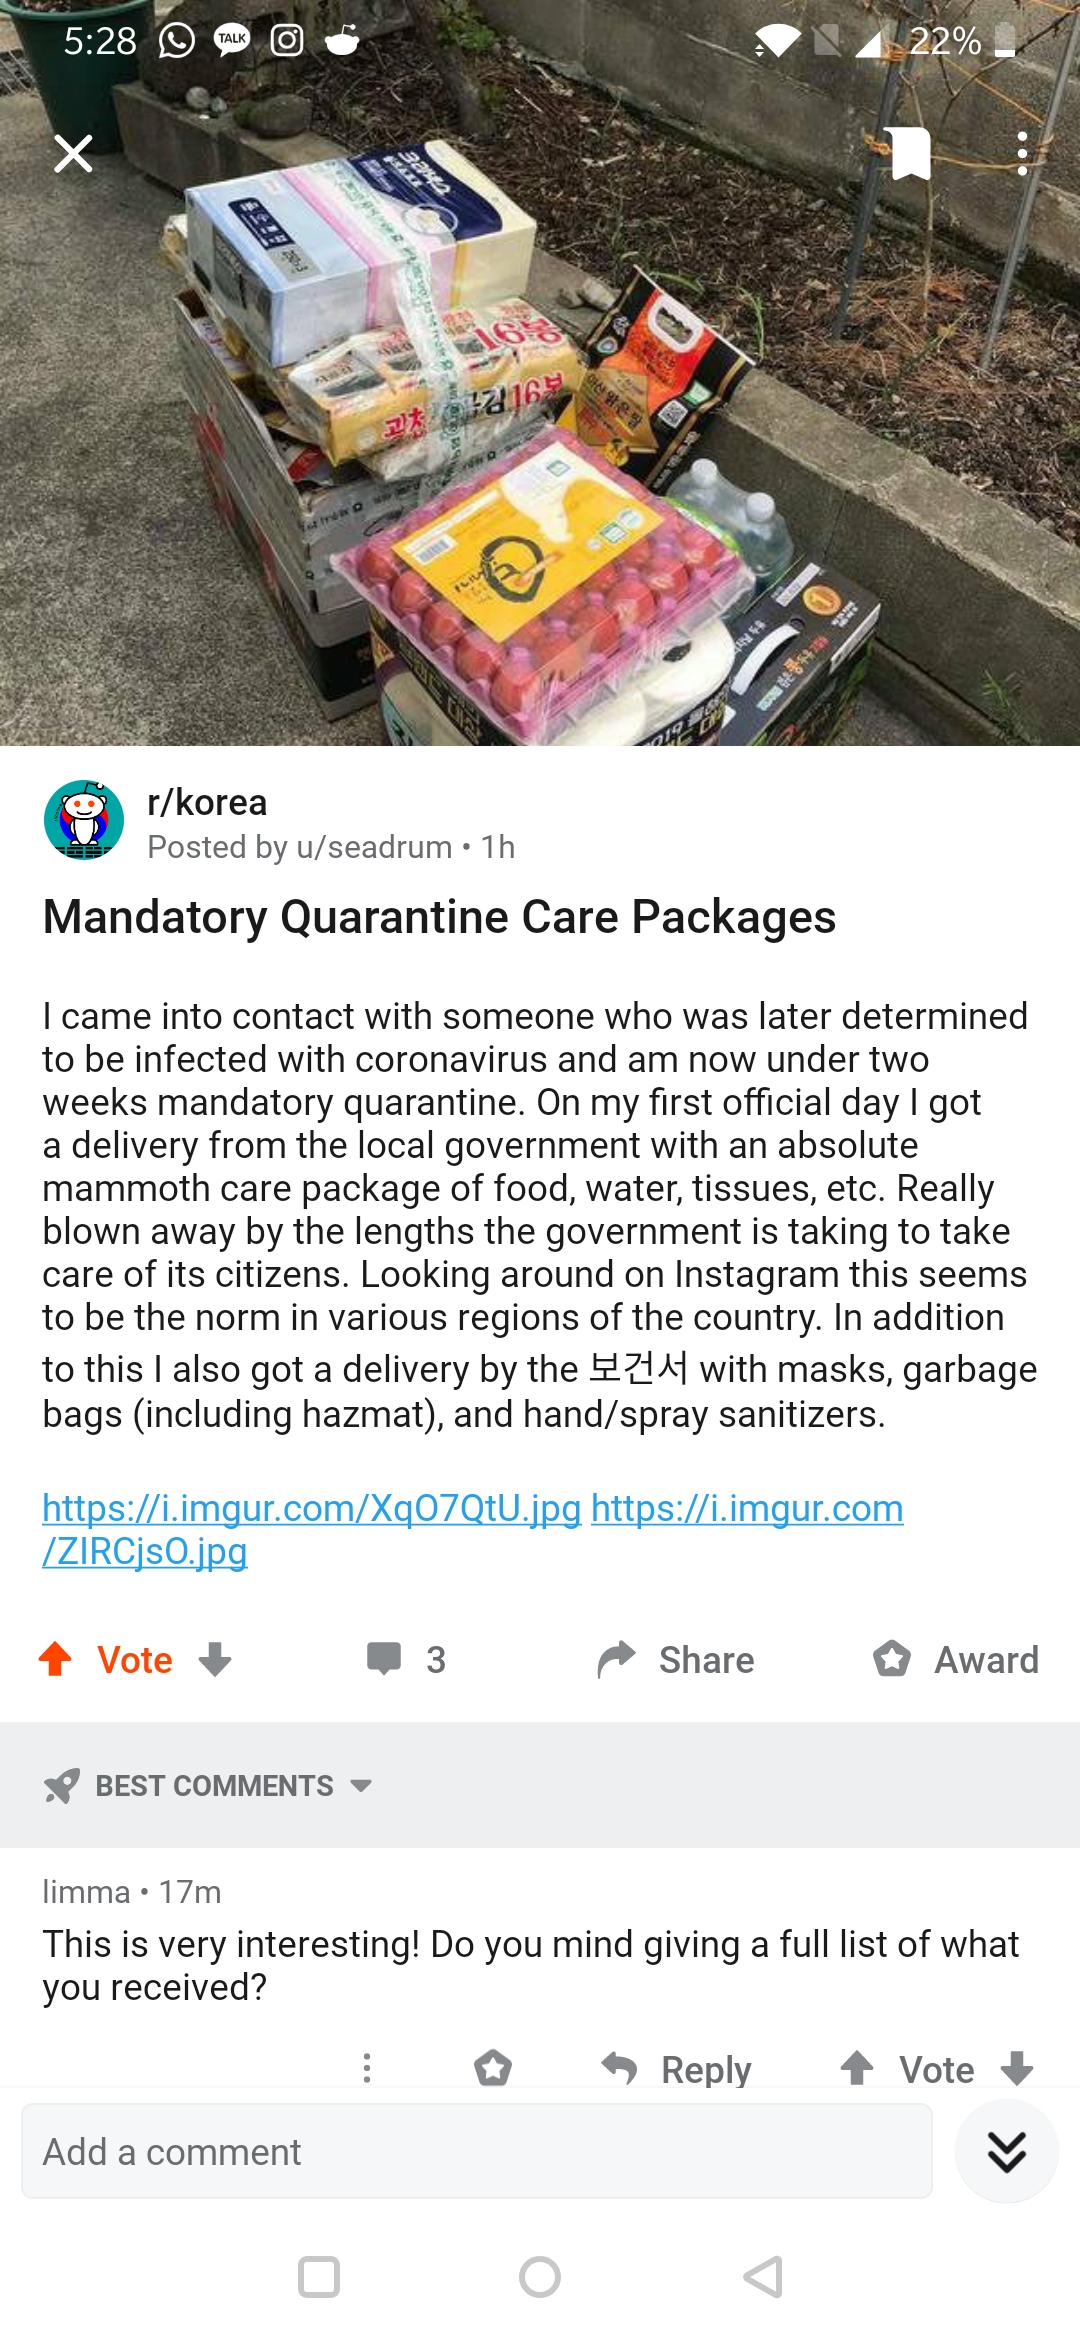 website - . tkorea Posted by drum.th Mandatory Quarantine Care Packages I came into contact with someone who was later determined to be infected with coronavirus and am now under two weeks mandatory quarantine. On my first official day I got 8 delivery fr